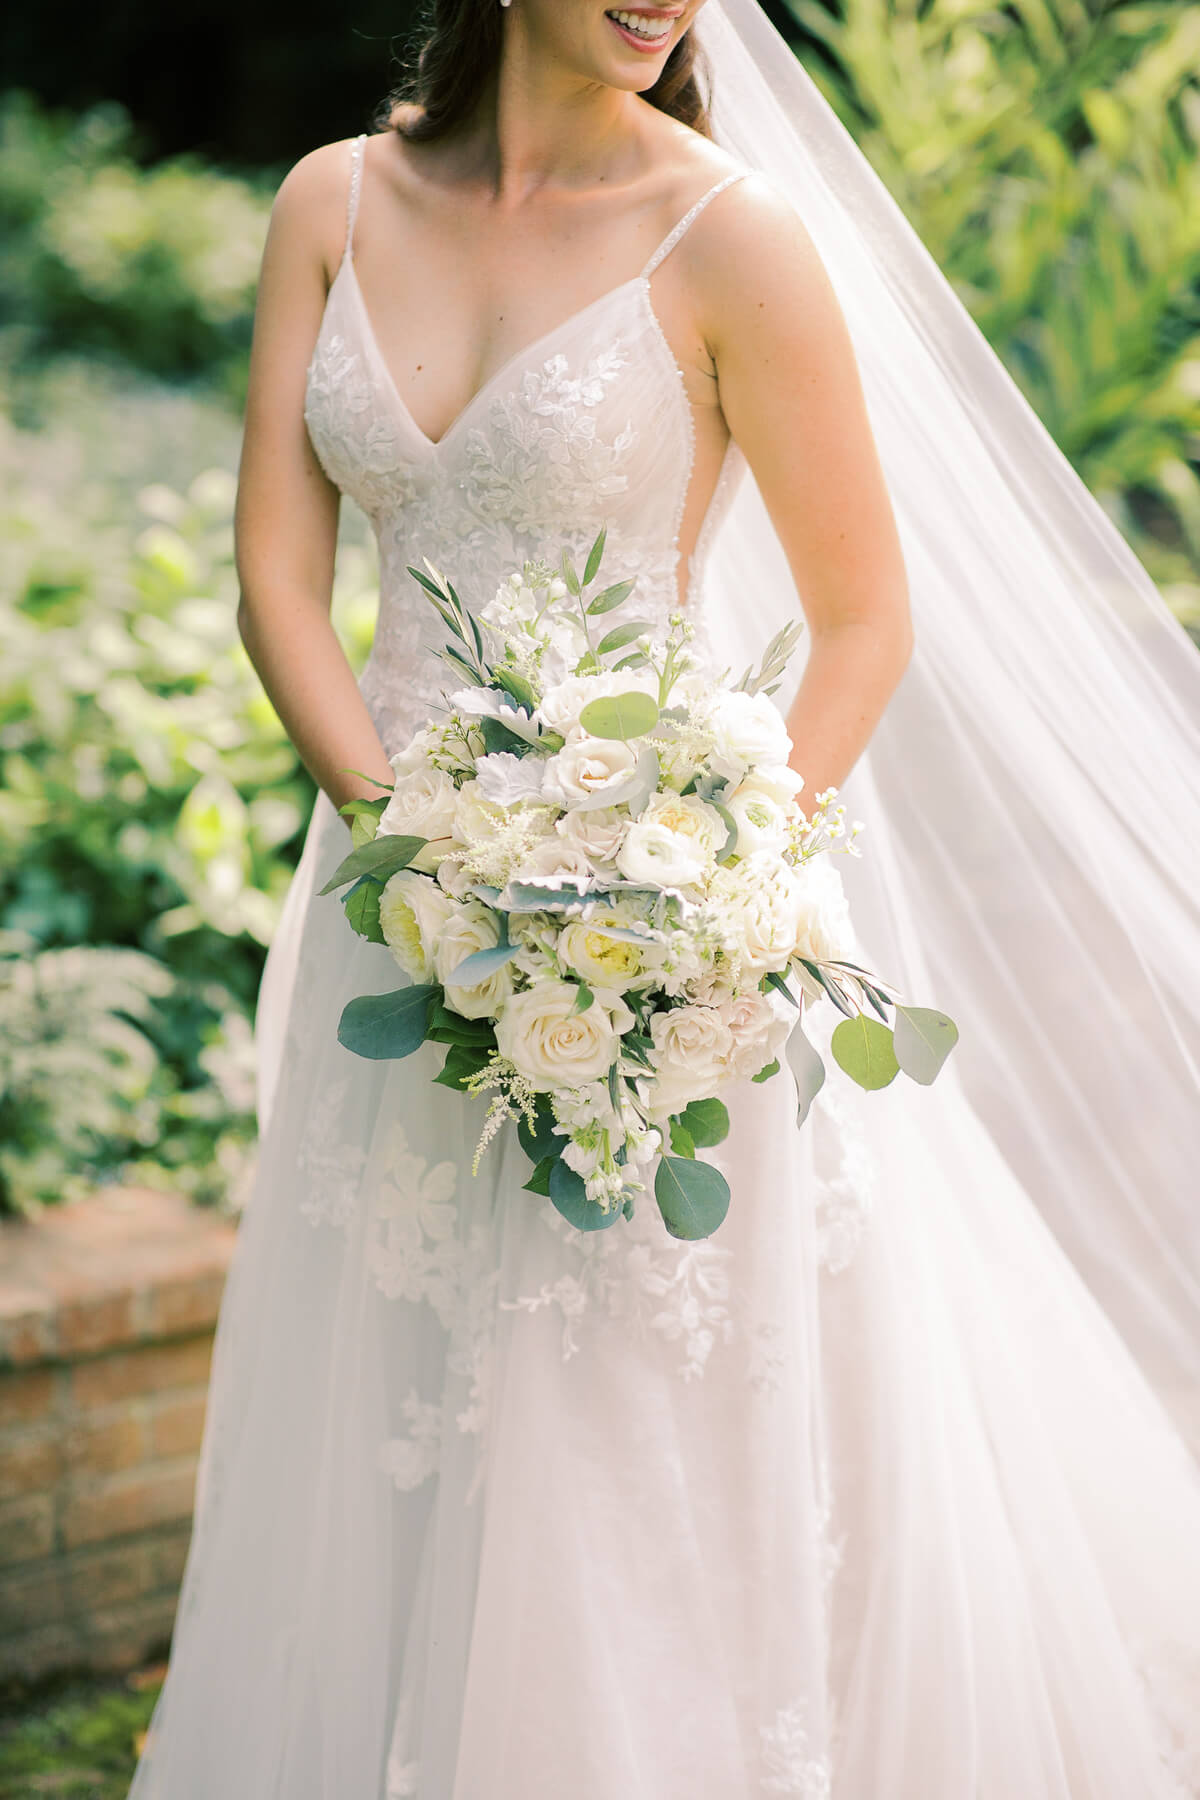 White roses and greenery wedding bouquet